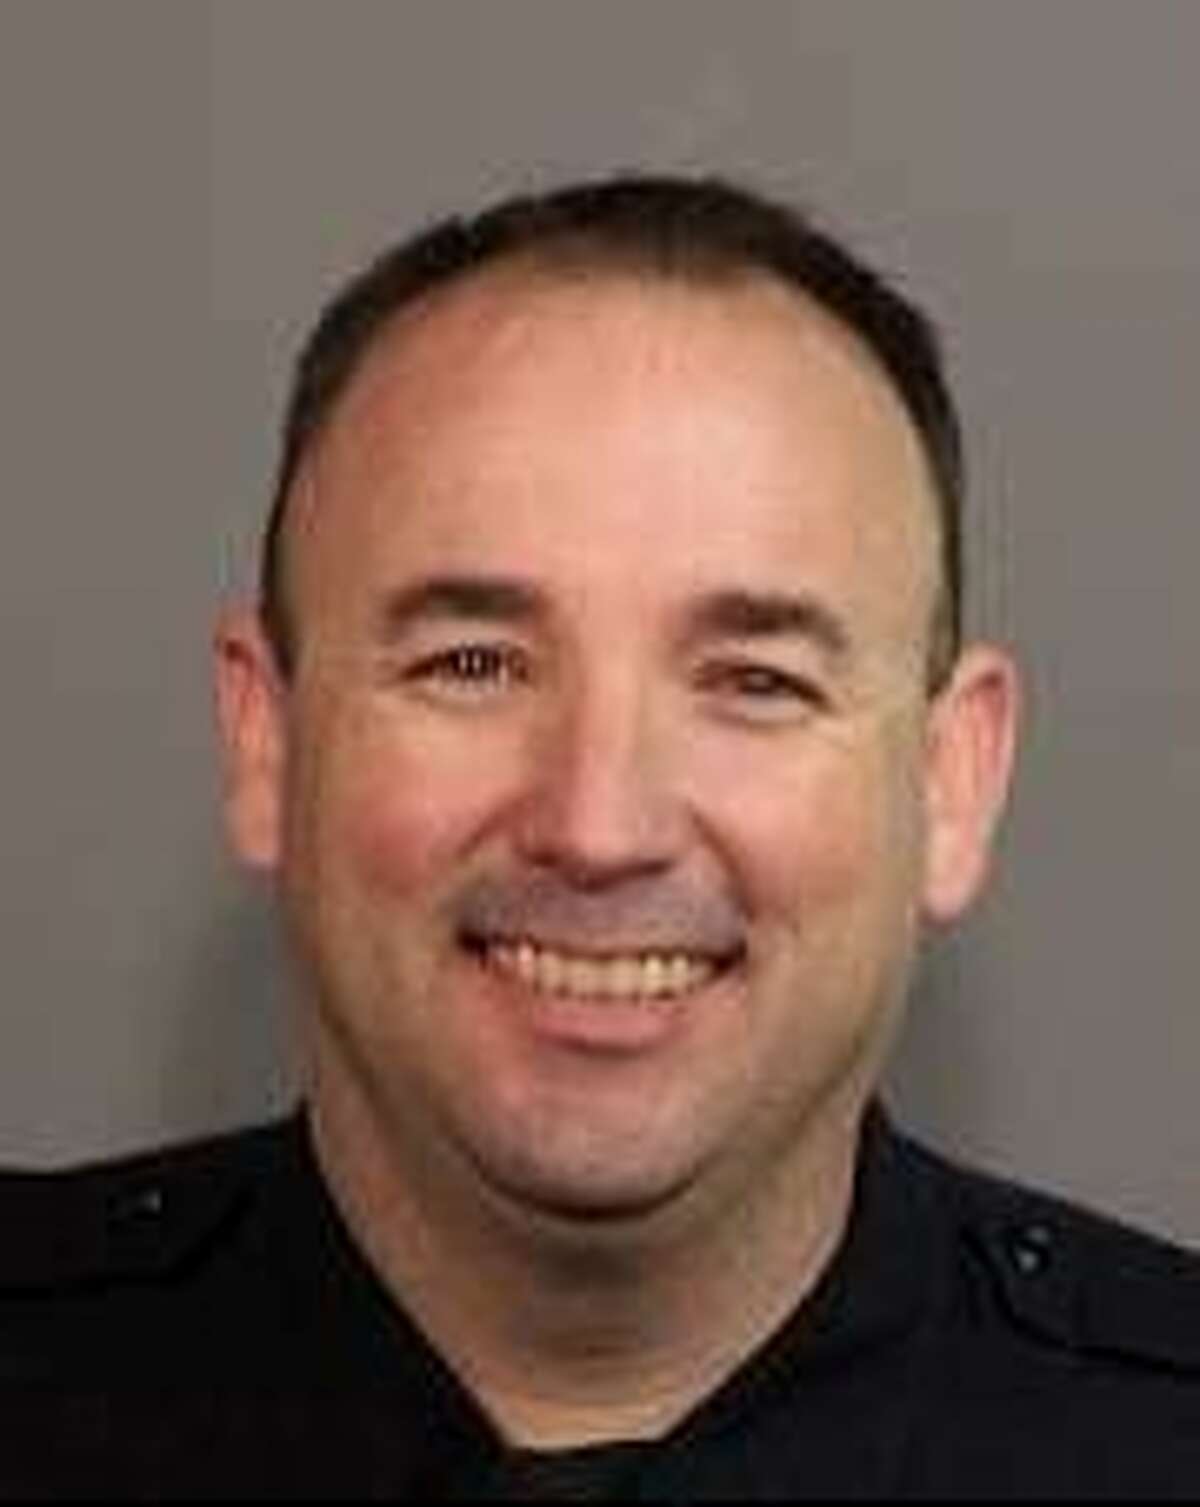 San Jose police Officer Geoffrey Graves, charged with raping a woman in connection with an on-duty incident that happened Sept. 22, 2013.